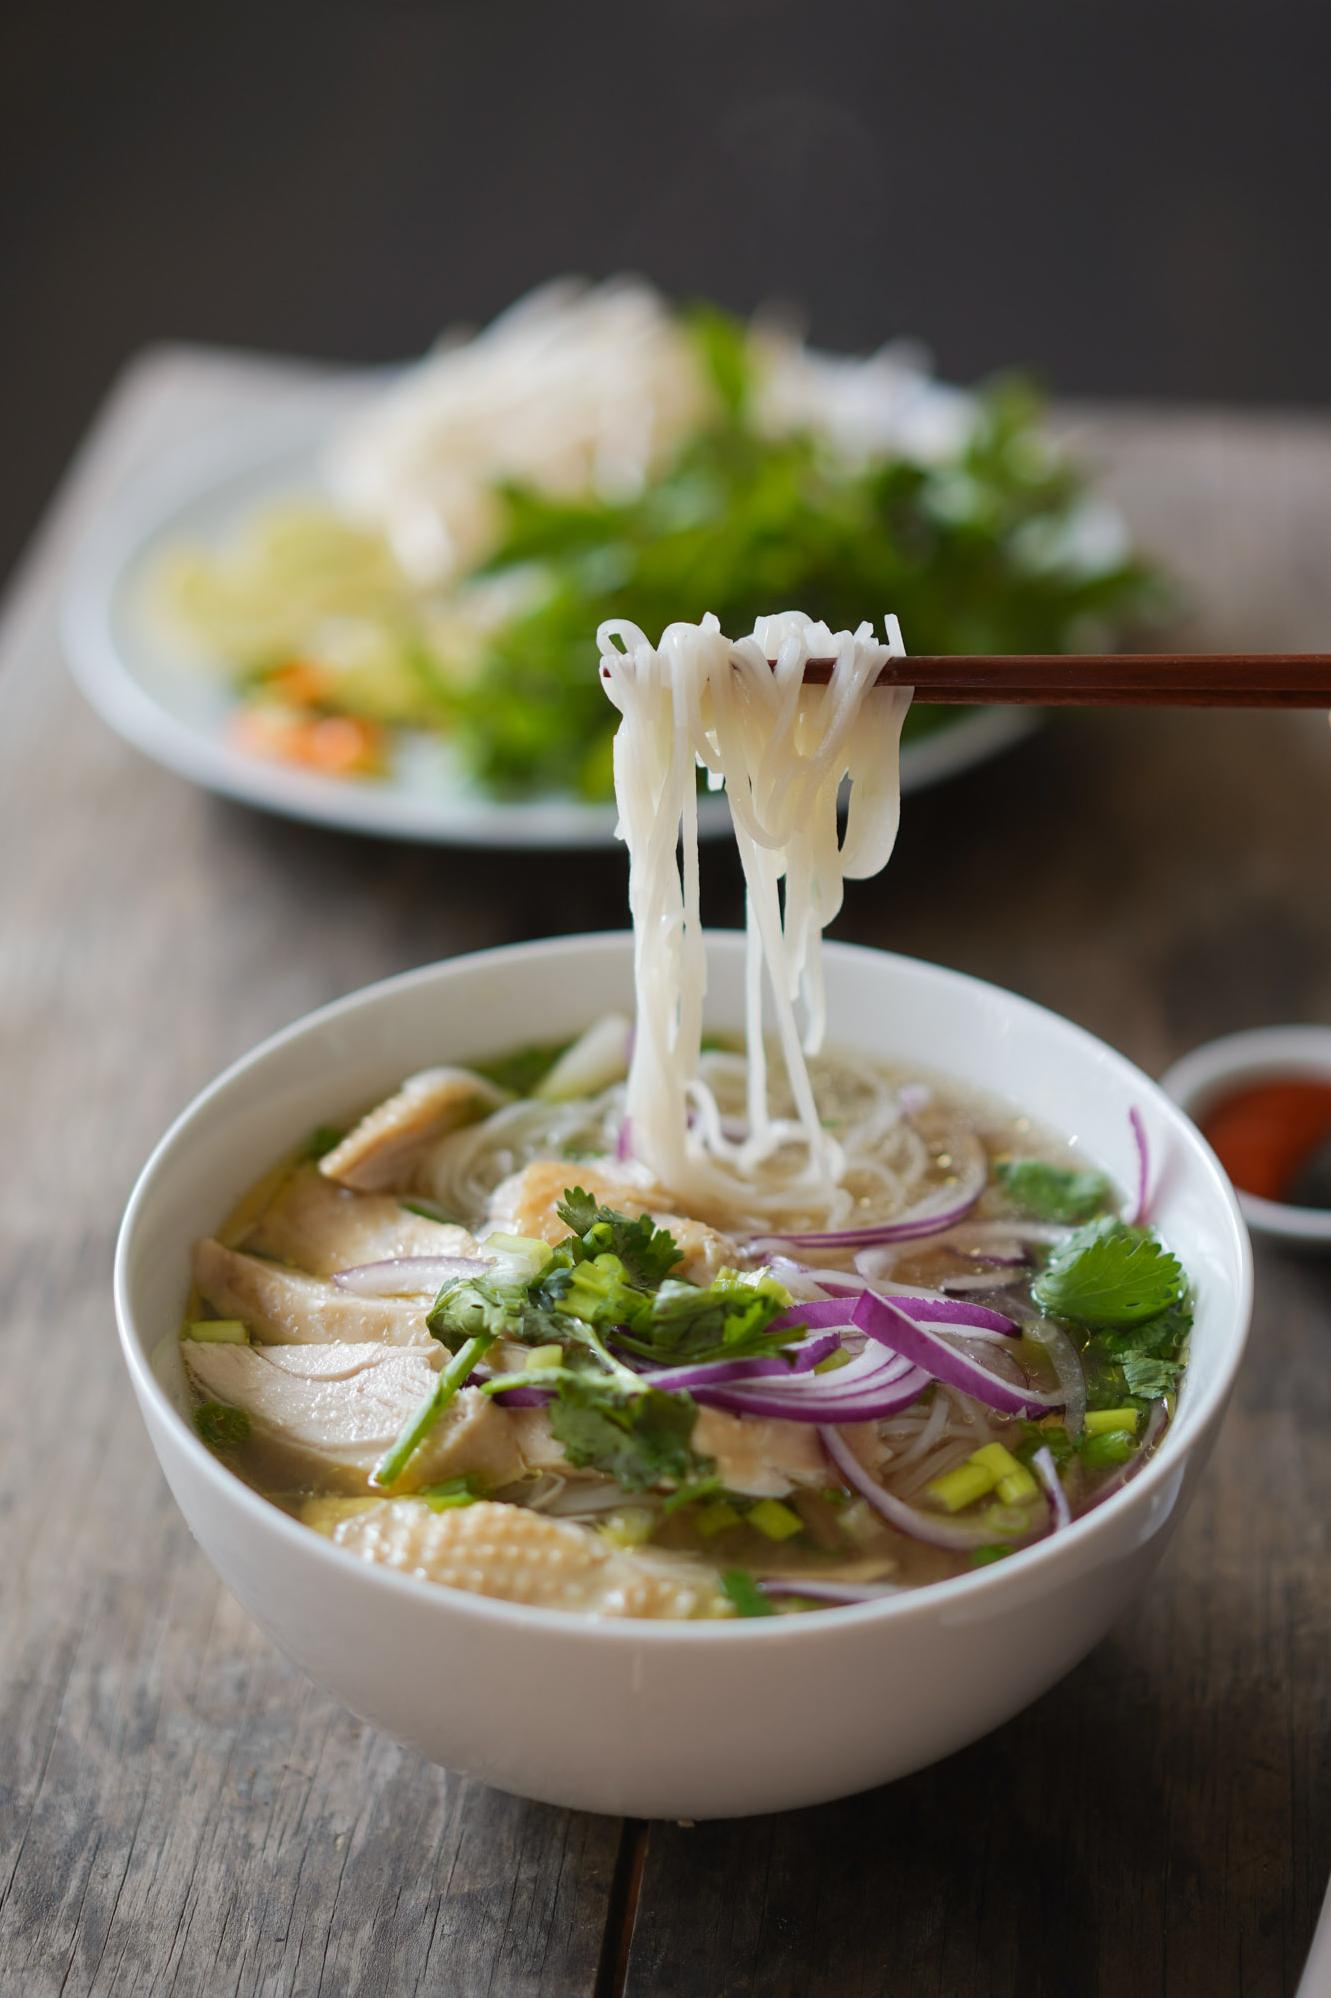  A warm bowl of Vietnamese chicken pho is the perfect comfort food on a chilly day.